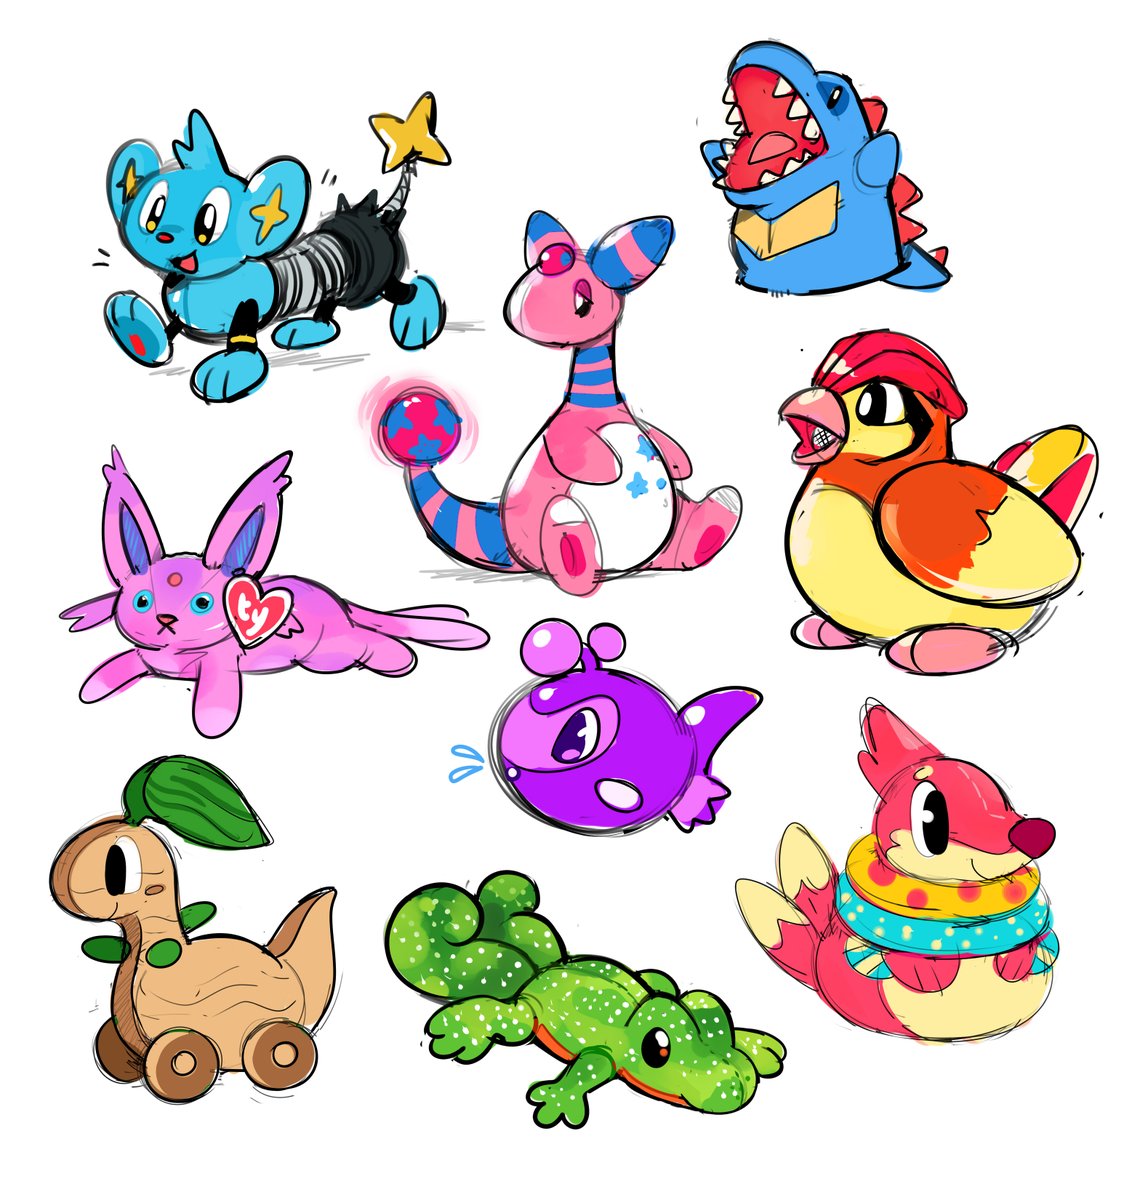 Some toy pokemon doodles I worked on a while ago (including the rough draft of my slinky shinx I uploaded earlier this year)